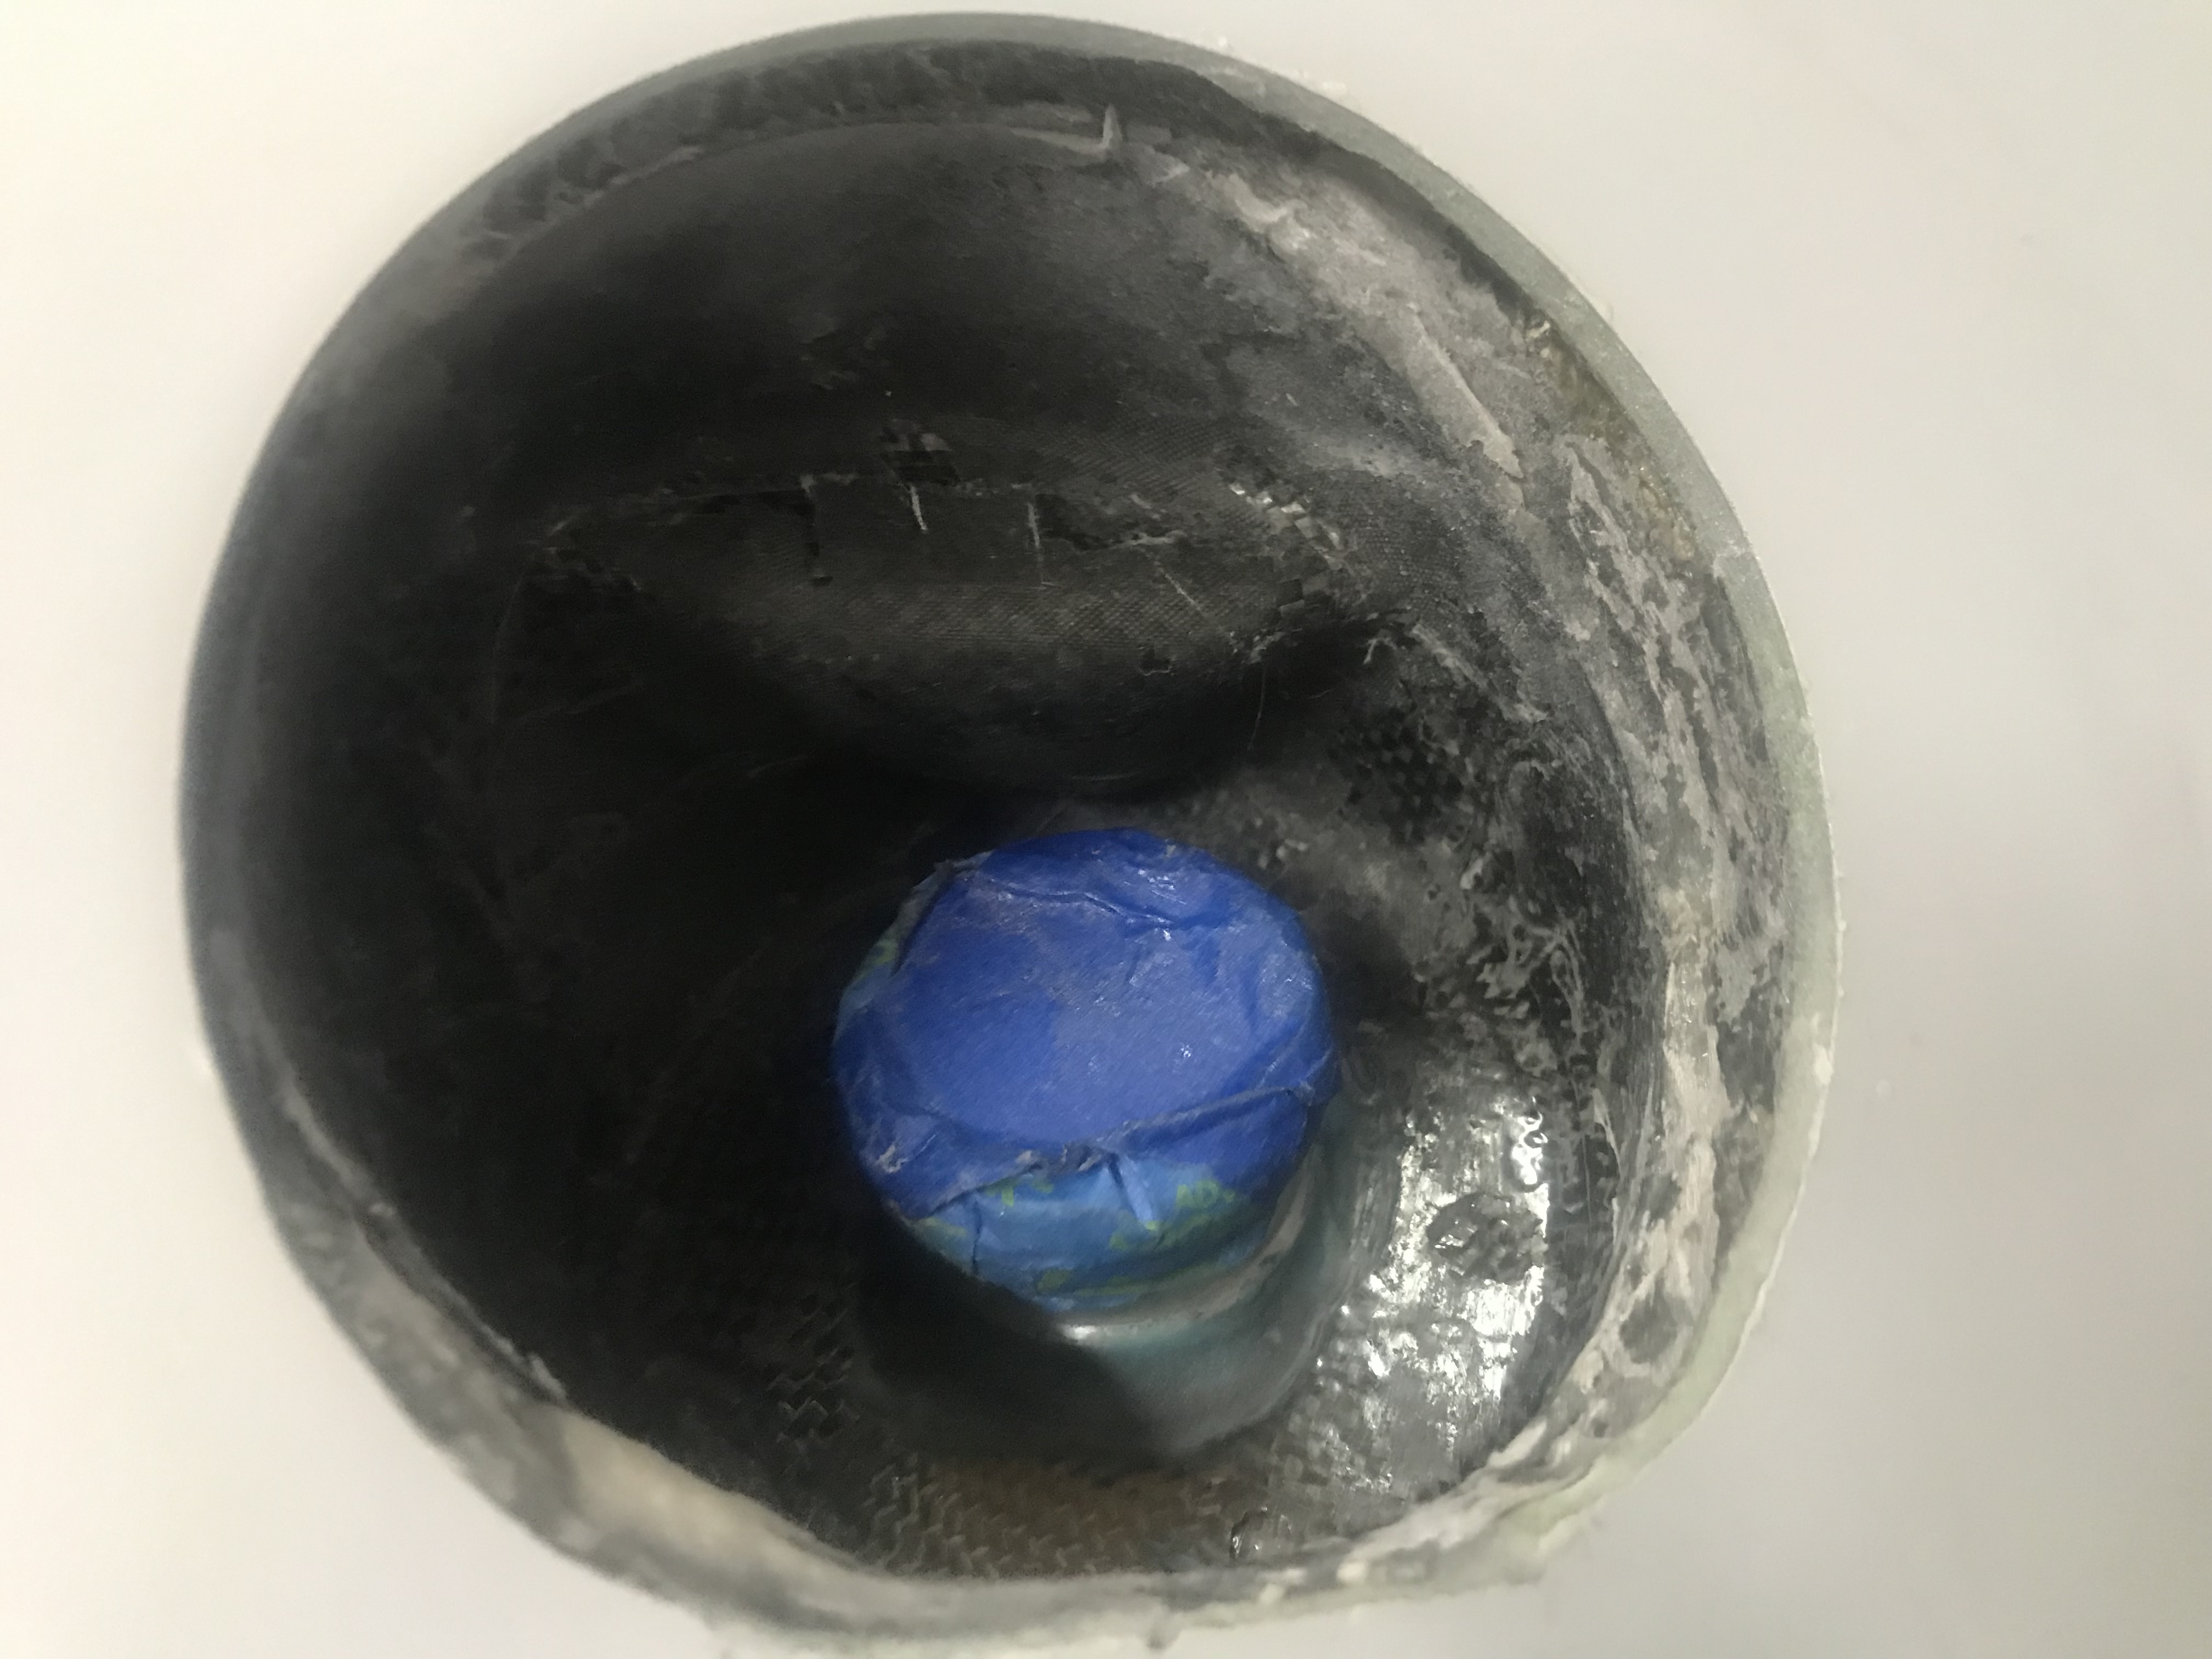 Actual cap covered with blue tape.  This is the bucket built for the filler neck and cap, with a recess for the rudder bell crank to swing without hitting the bucket.